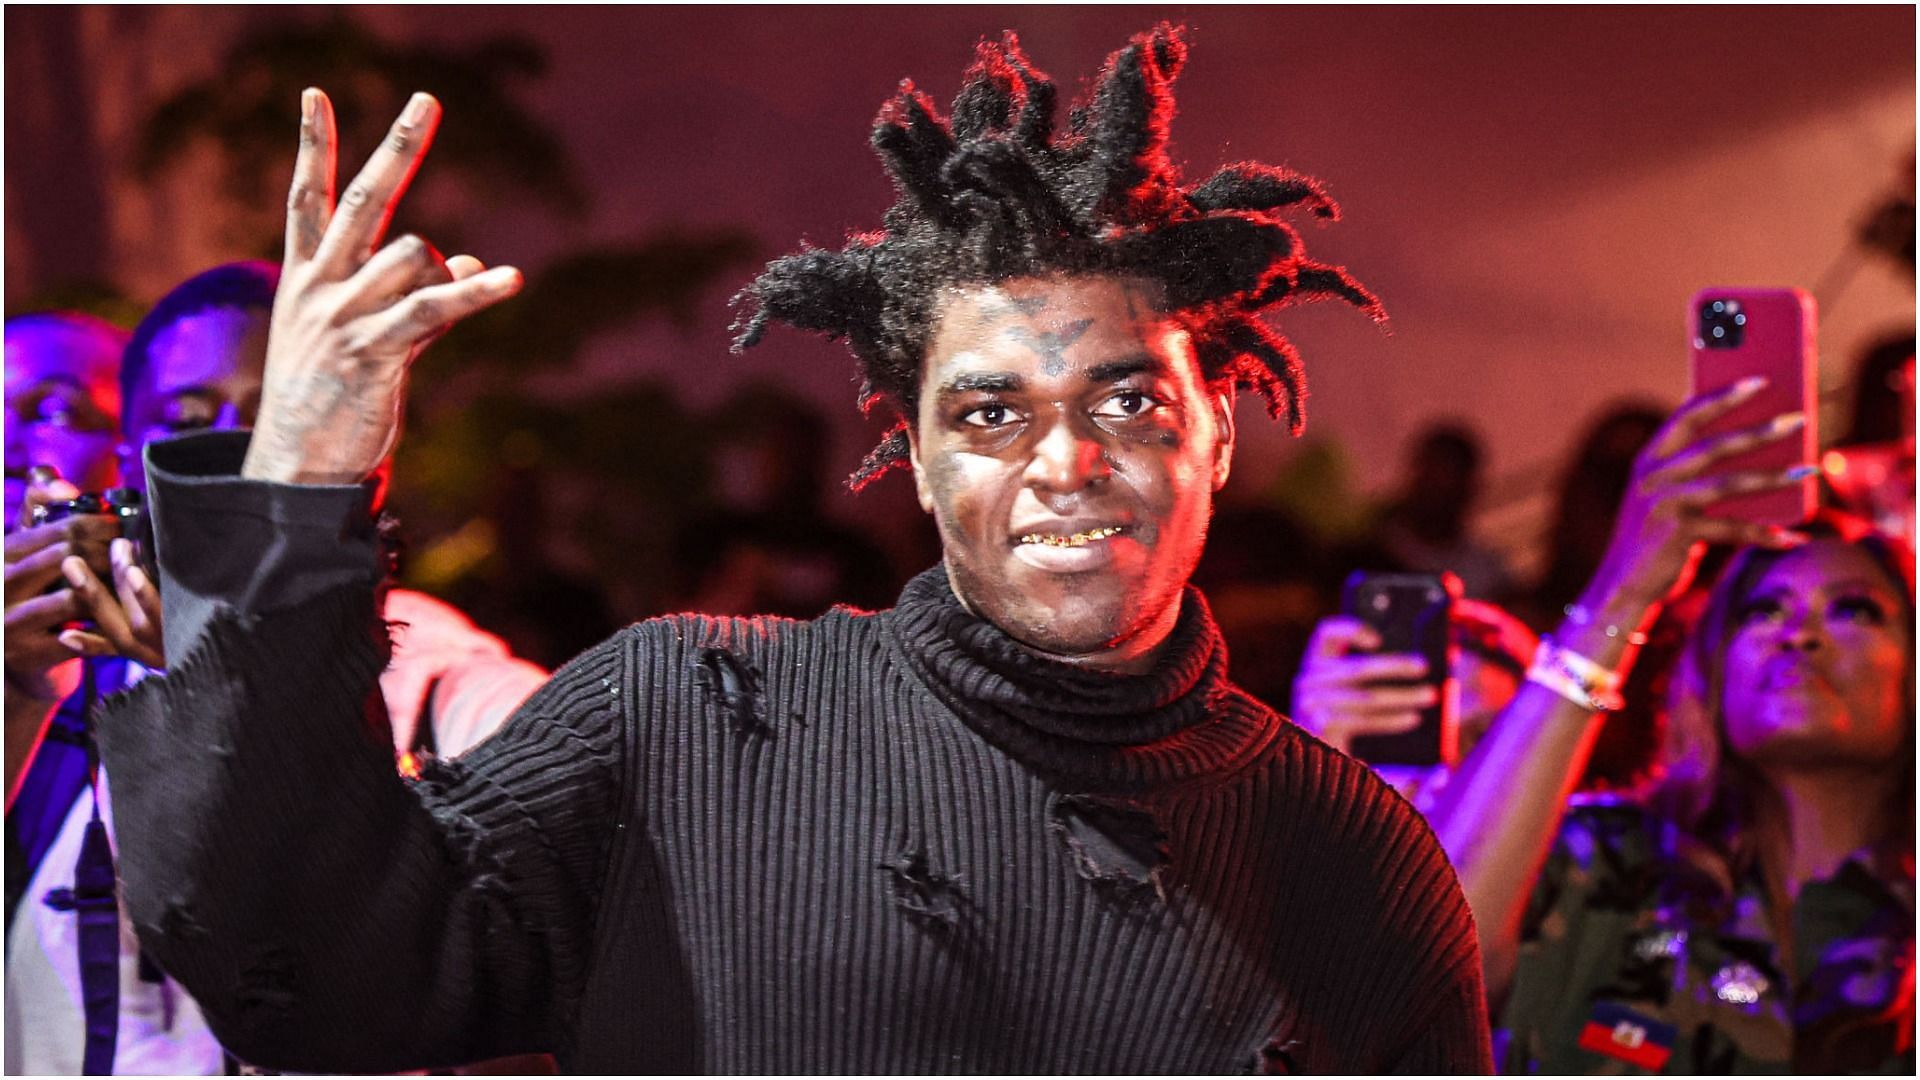 Kodak Black performs at the Miami Benefit concert for Haiti at Oasis Wynwood (Image by John Parra via Getty Images)